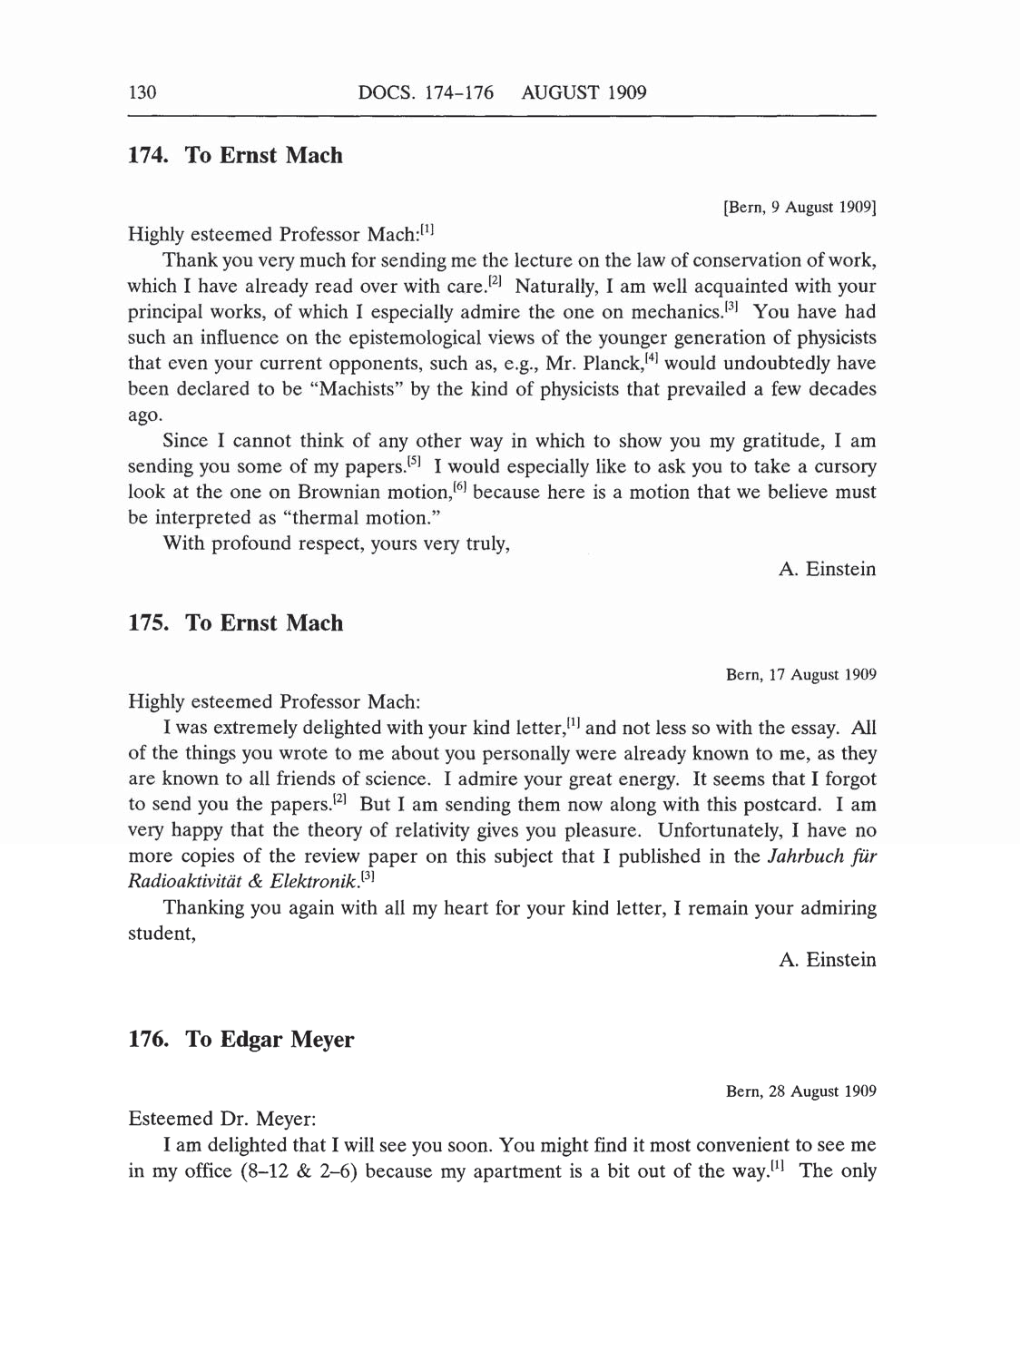 Volume 5: The Swiss Years: Correspondence, 1902-1914 (English translation supplement) page 130